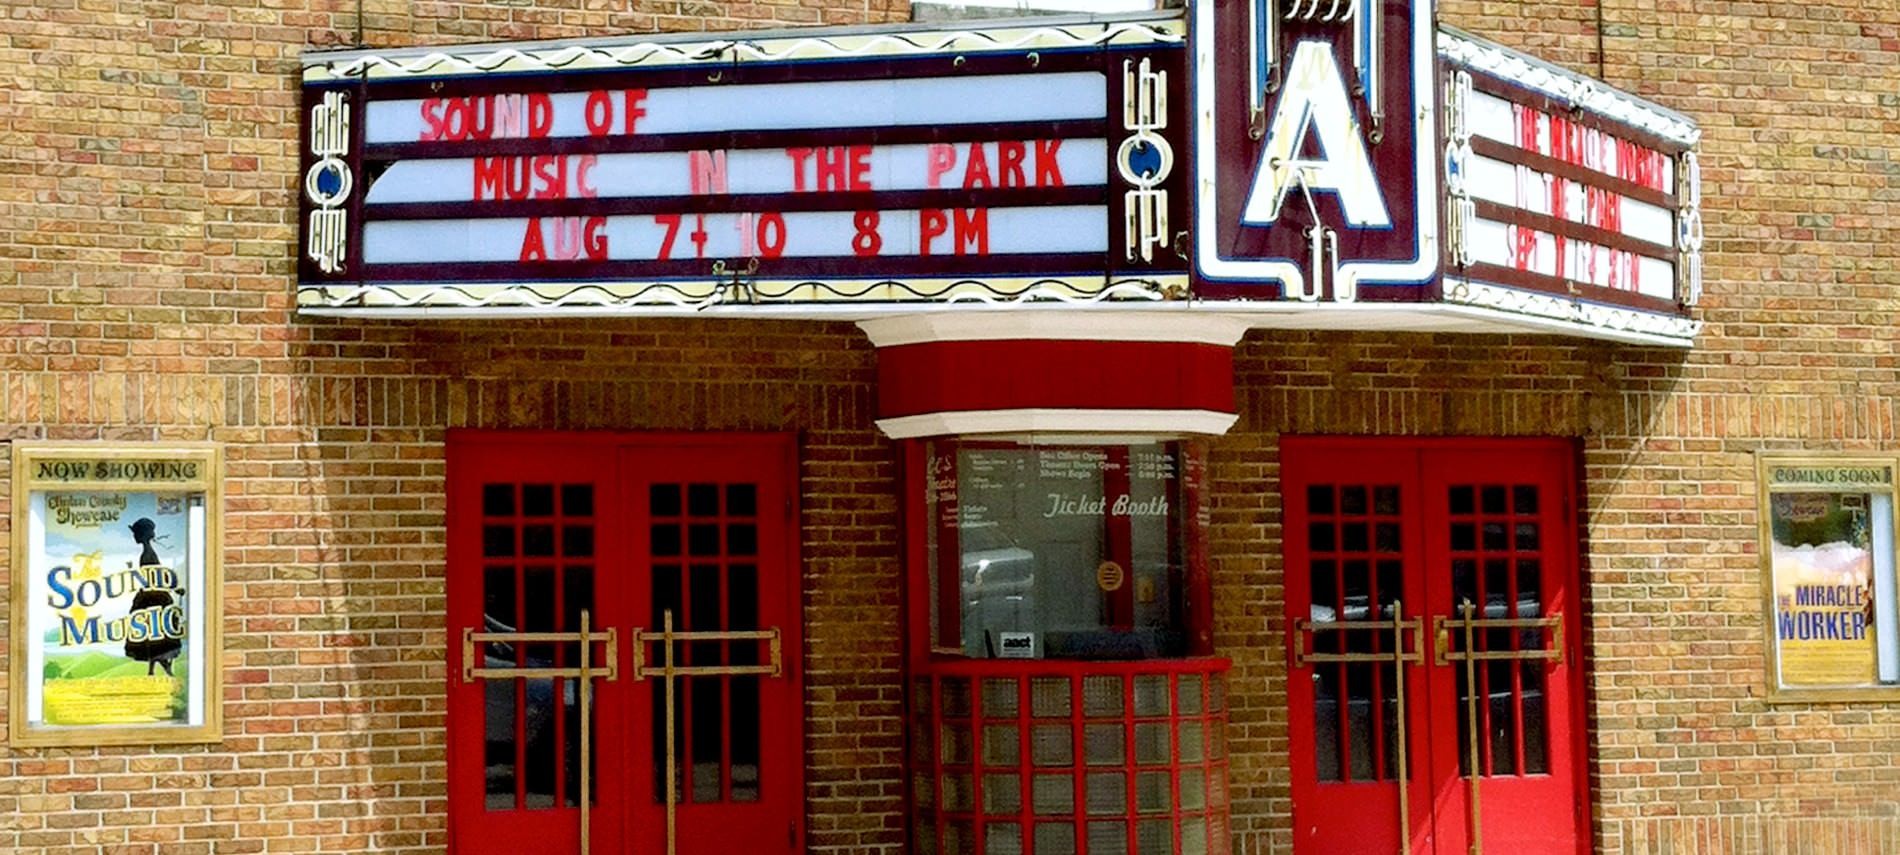 Front of tan brick theatre building with red doors with, ticket booth, billboard announcing Sound of Music In The Park.